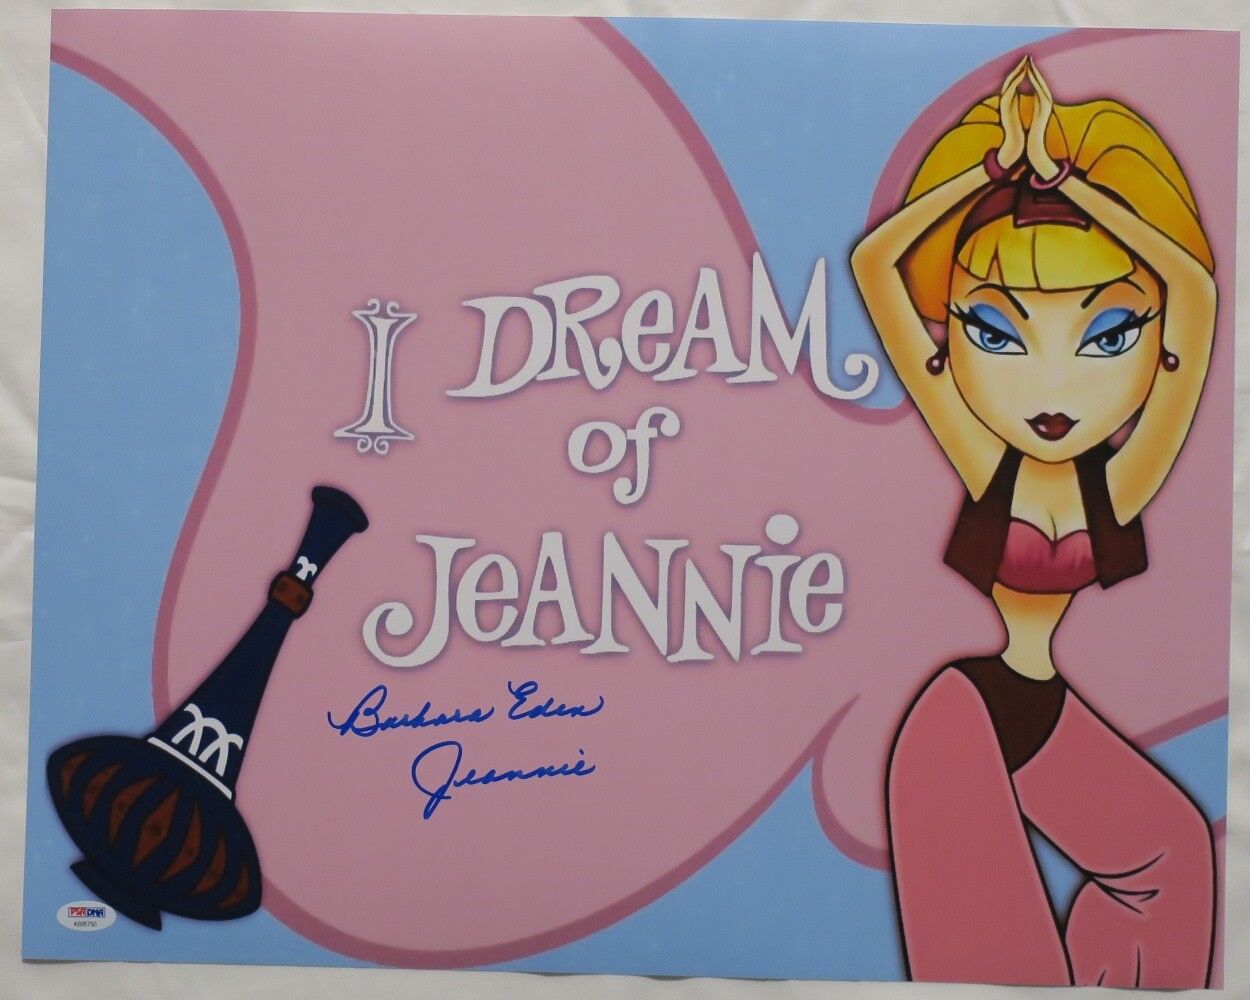 Barbara Eden Signed Jeannie Authentic Autographed 16x20 Photo Poster painting PSA/DNA COA